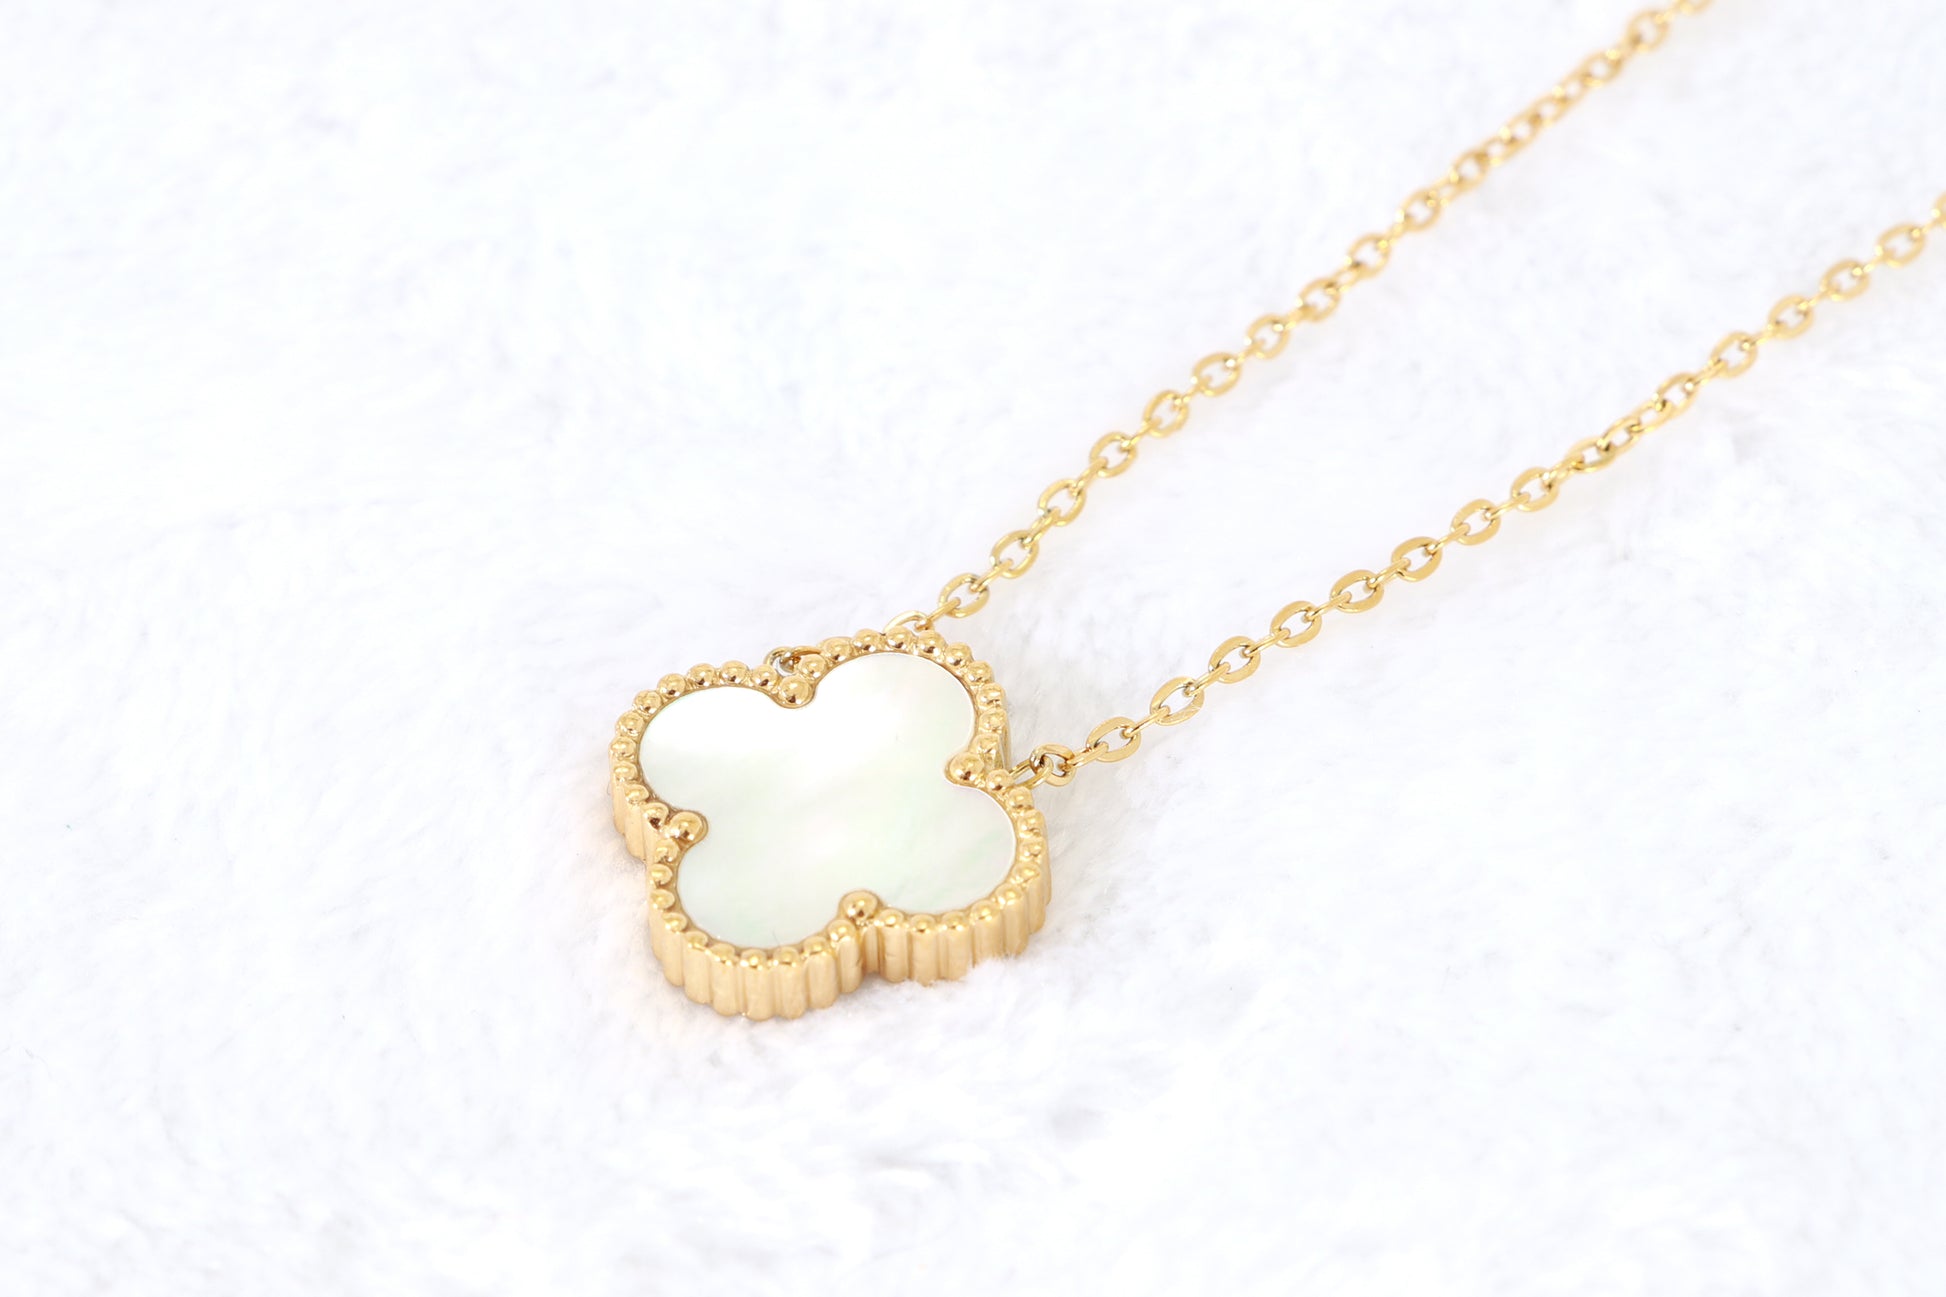 Good Luck Necklace / Clover Necklace